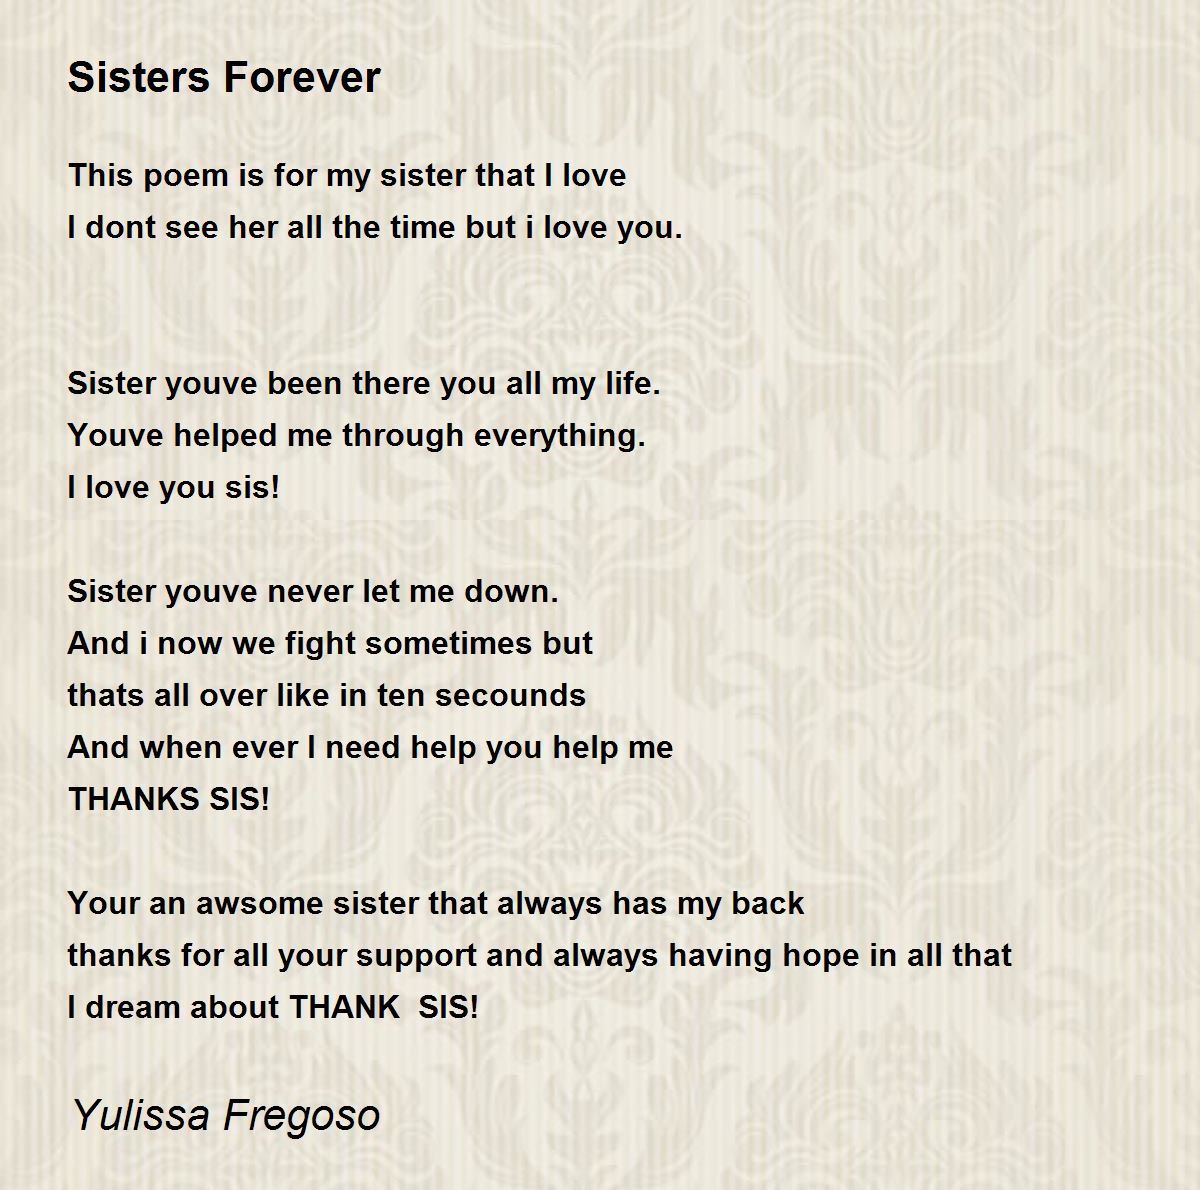 Sisters Forever - Sisters Forever Poem by Yulissa Fregoso